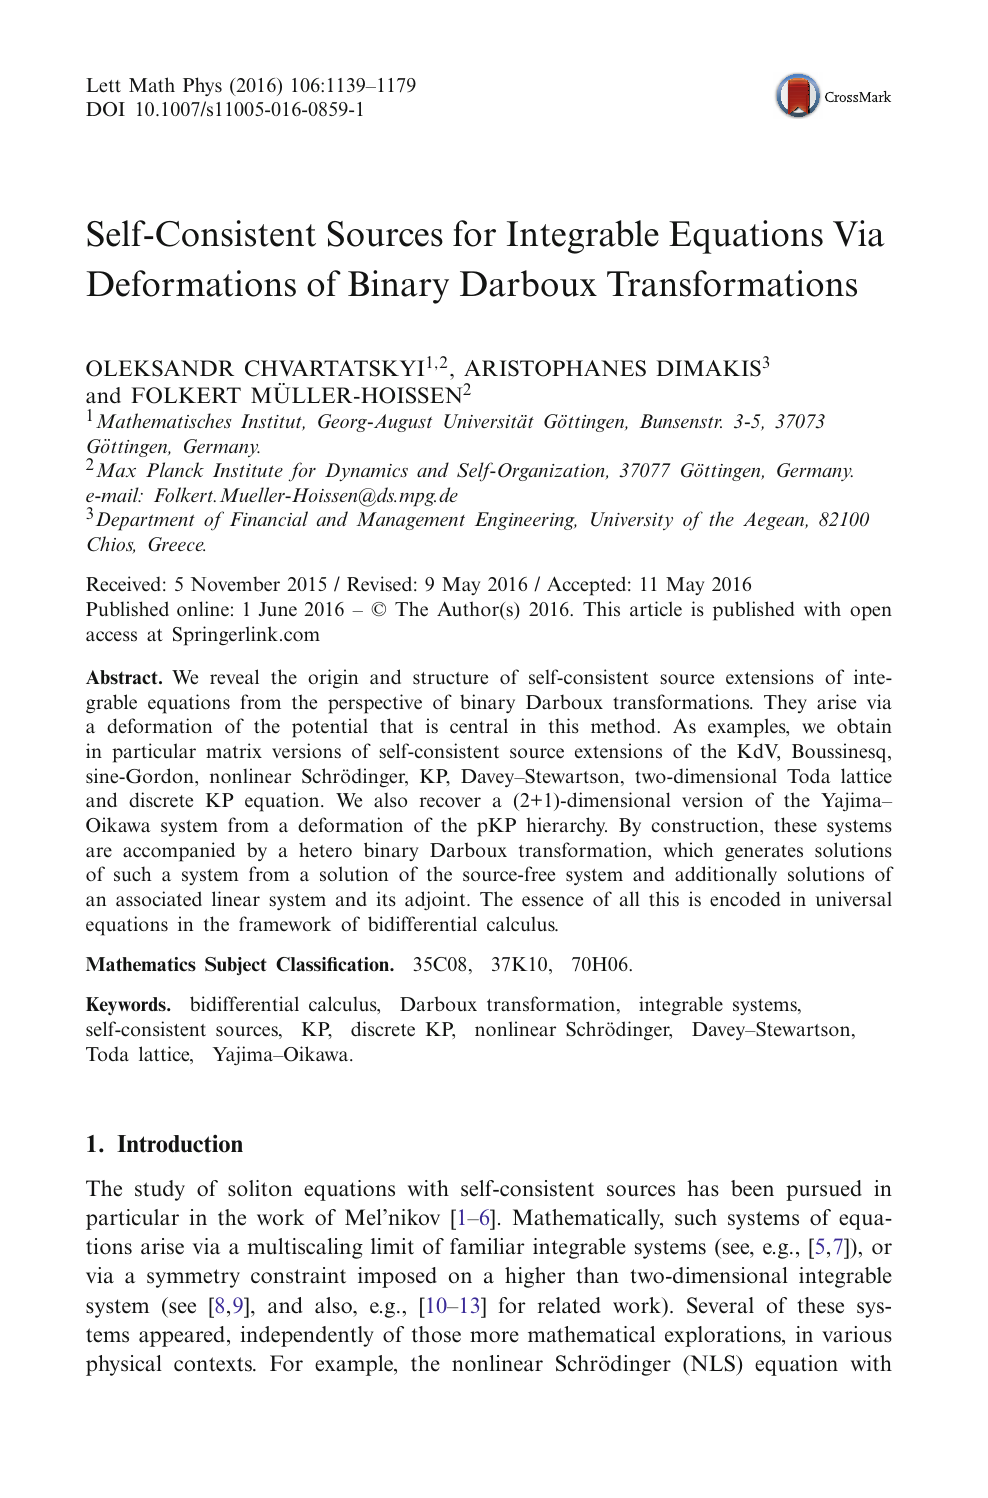 Self Consistent Sources For Integrable Equations Via Deformations Of Binary Darboux Transformations Topic Of Research Paper In Physical Sciences Download Scholarly Article Pdf And Read For Free On Cyberleninka Open Science Hub